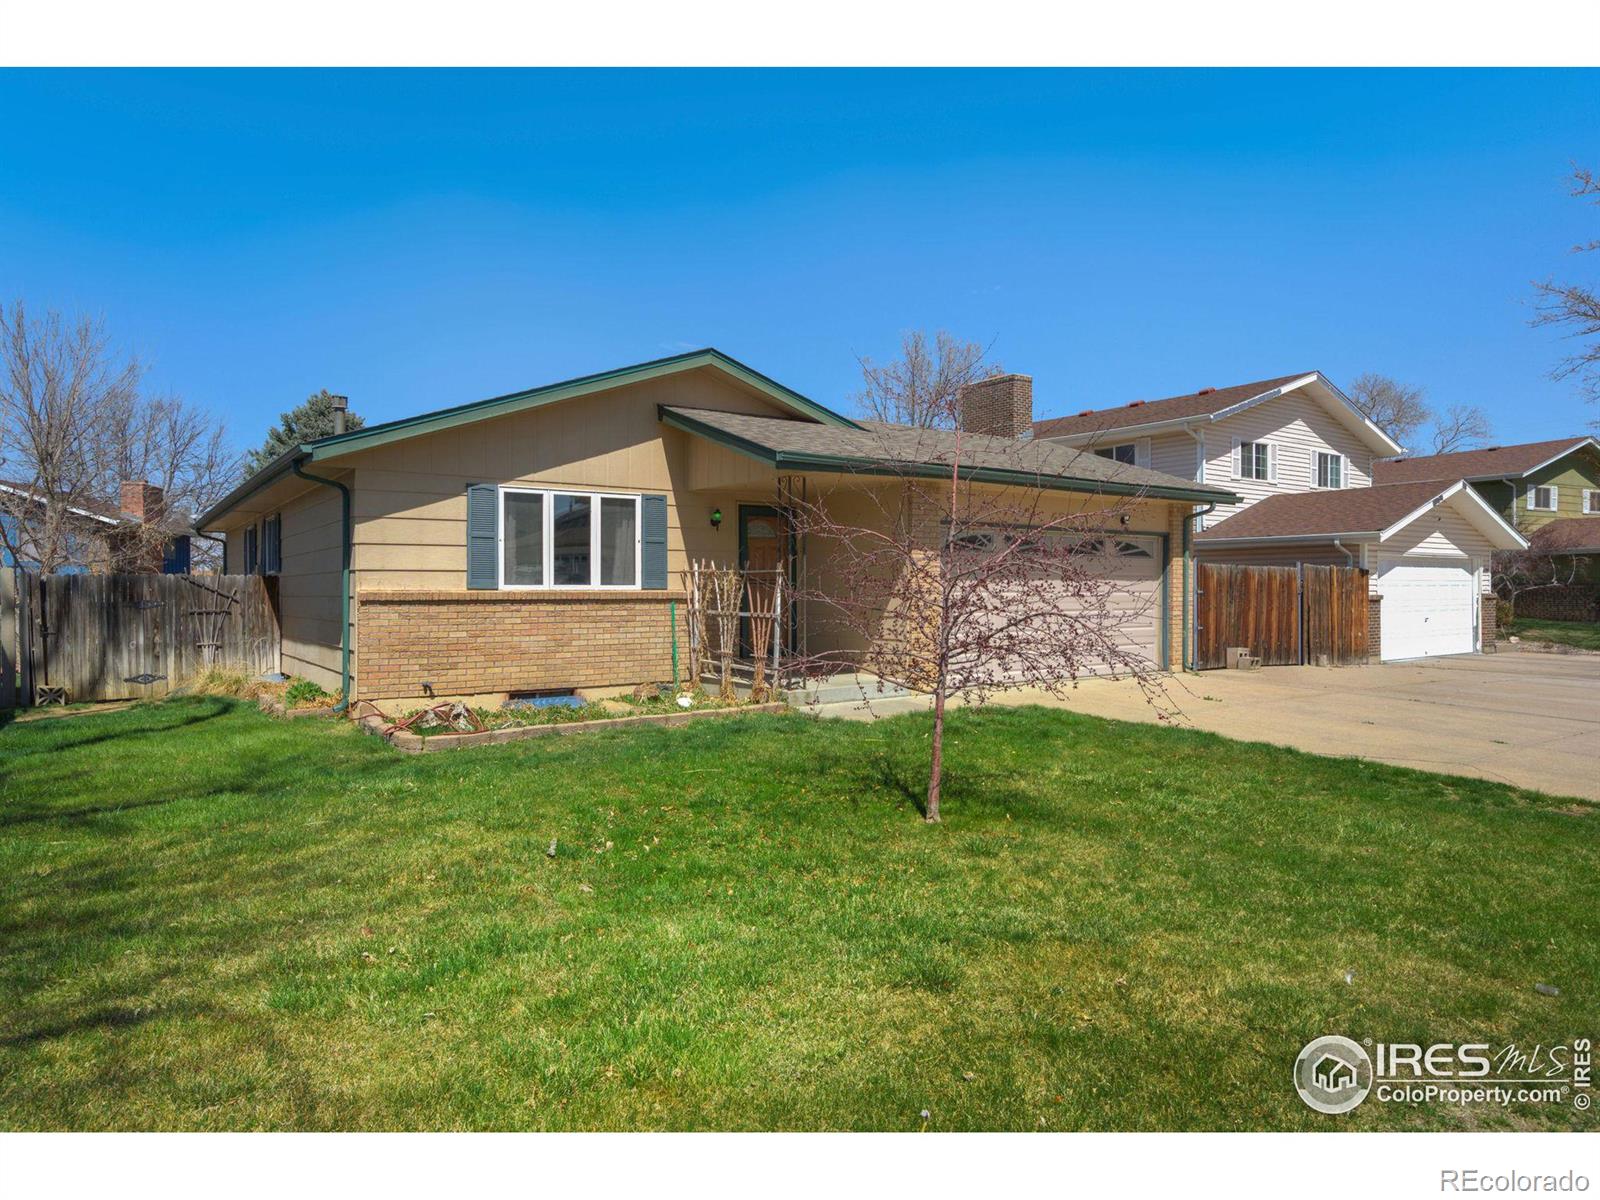 CMA Image for 2713 w 19th st rd,Greeley, Colorado